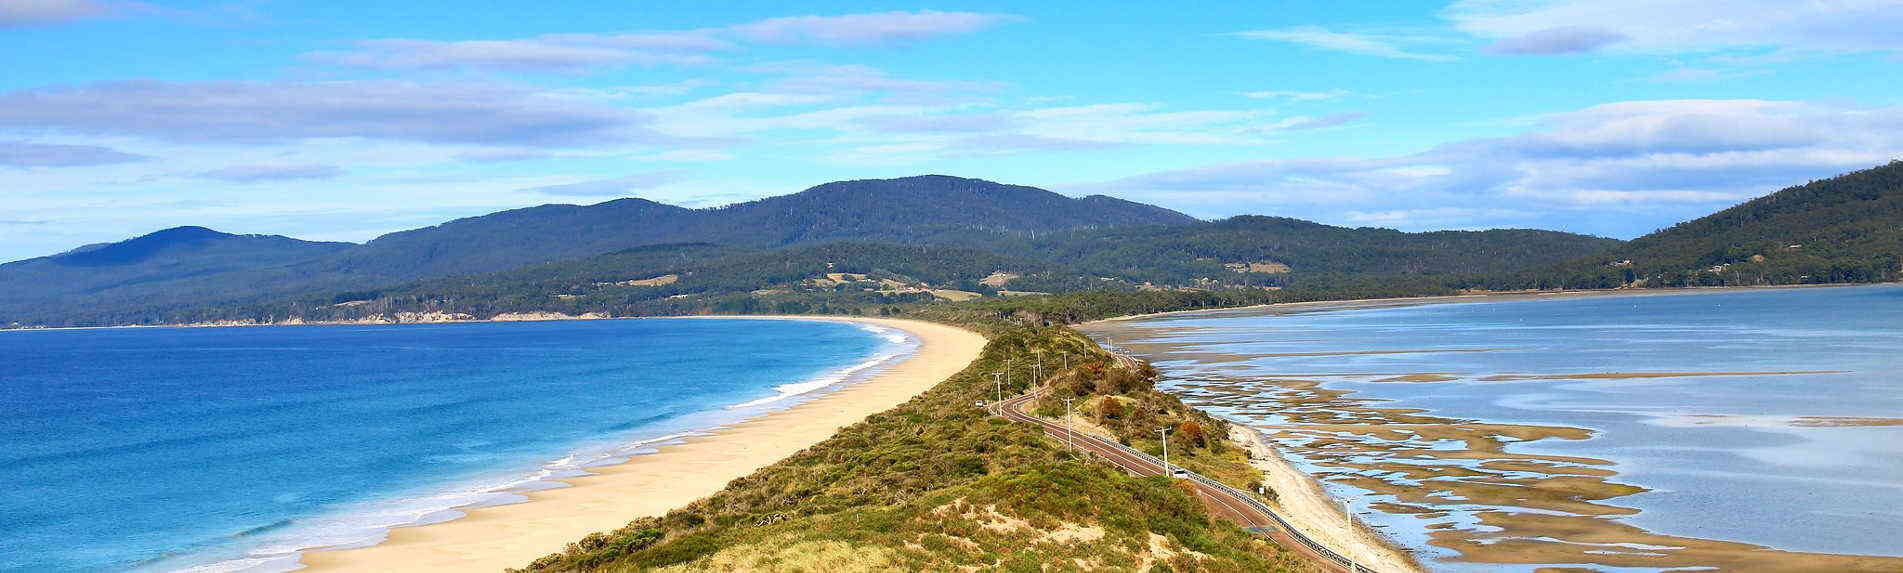 What is Tasmania Best Known For?